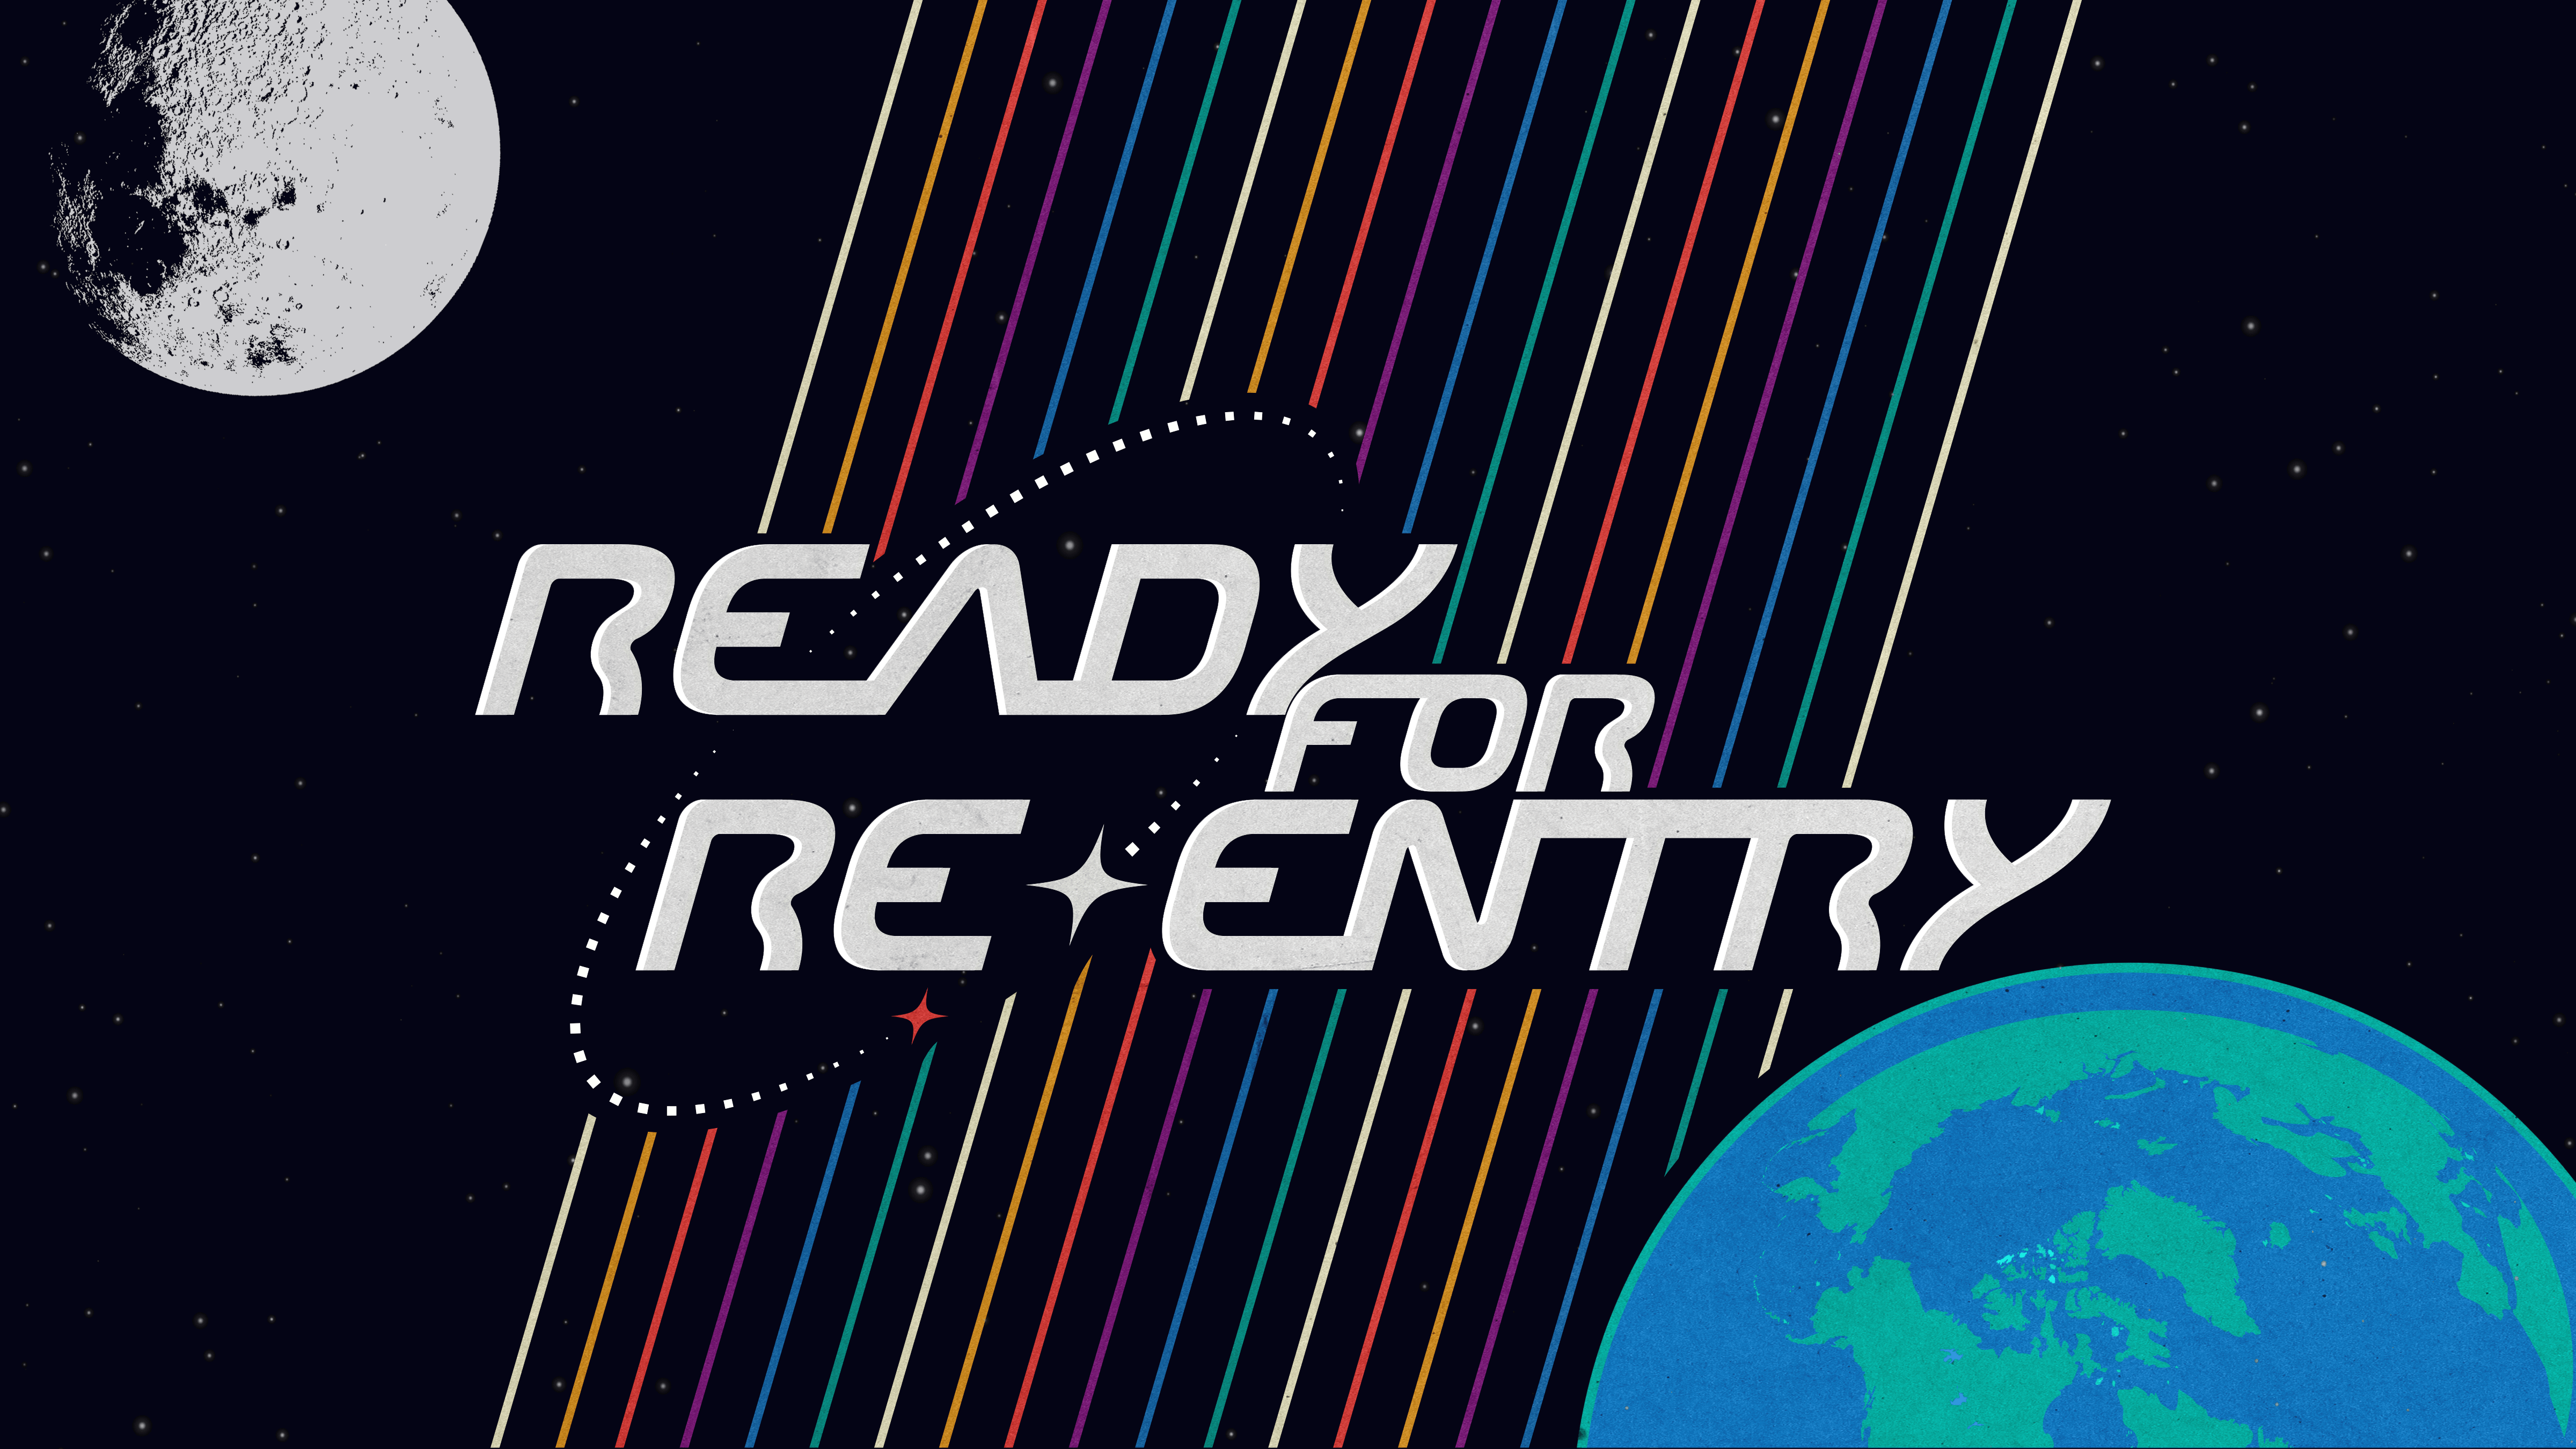 Ready for Re-Entry in space background